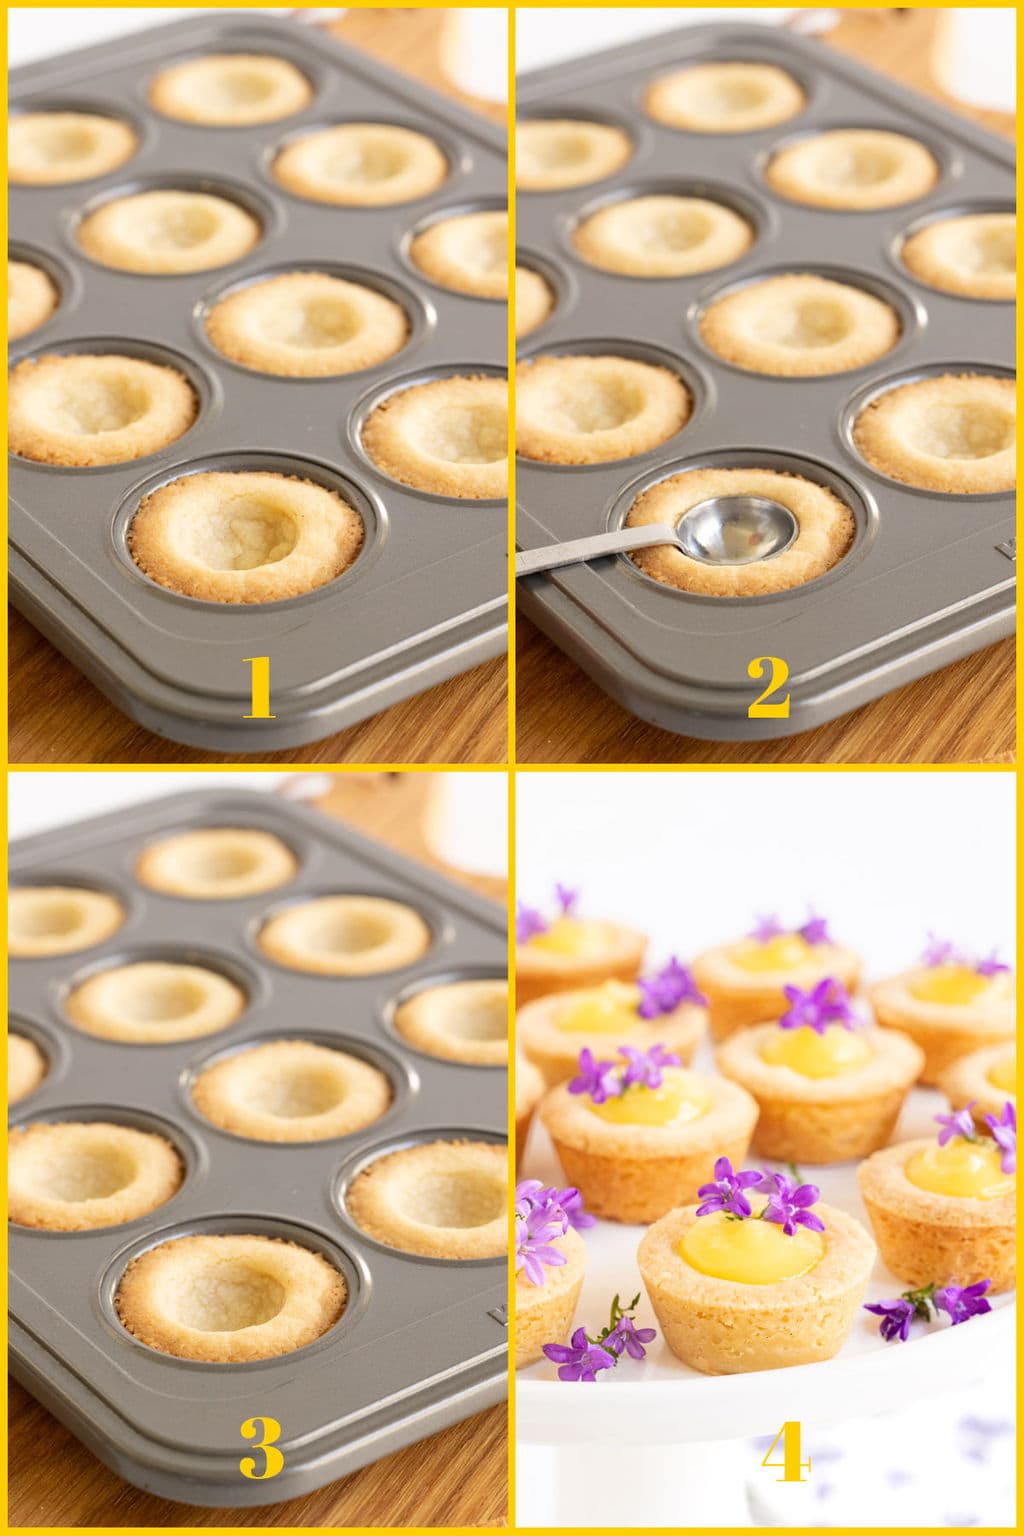 Vertical 4-step how-to-do photos demonstrating how to make the "dimples" for making Lemon Curd Shortbread Tarts.